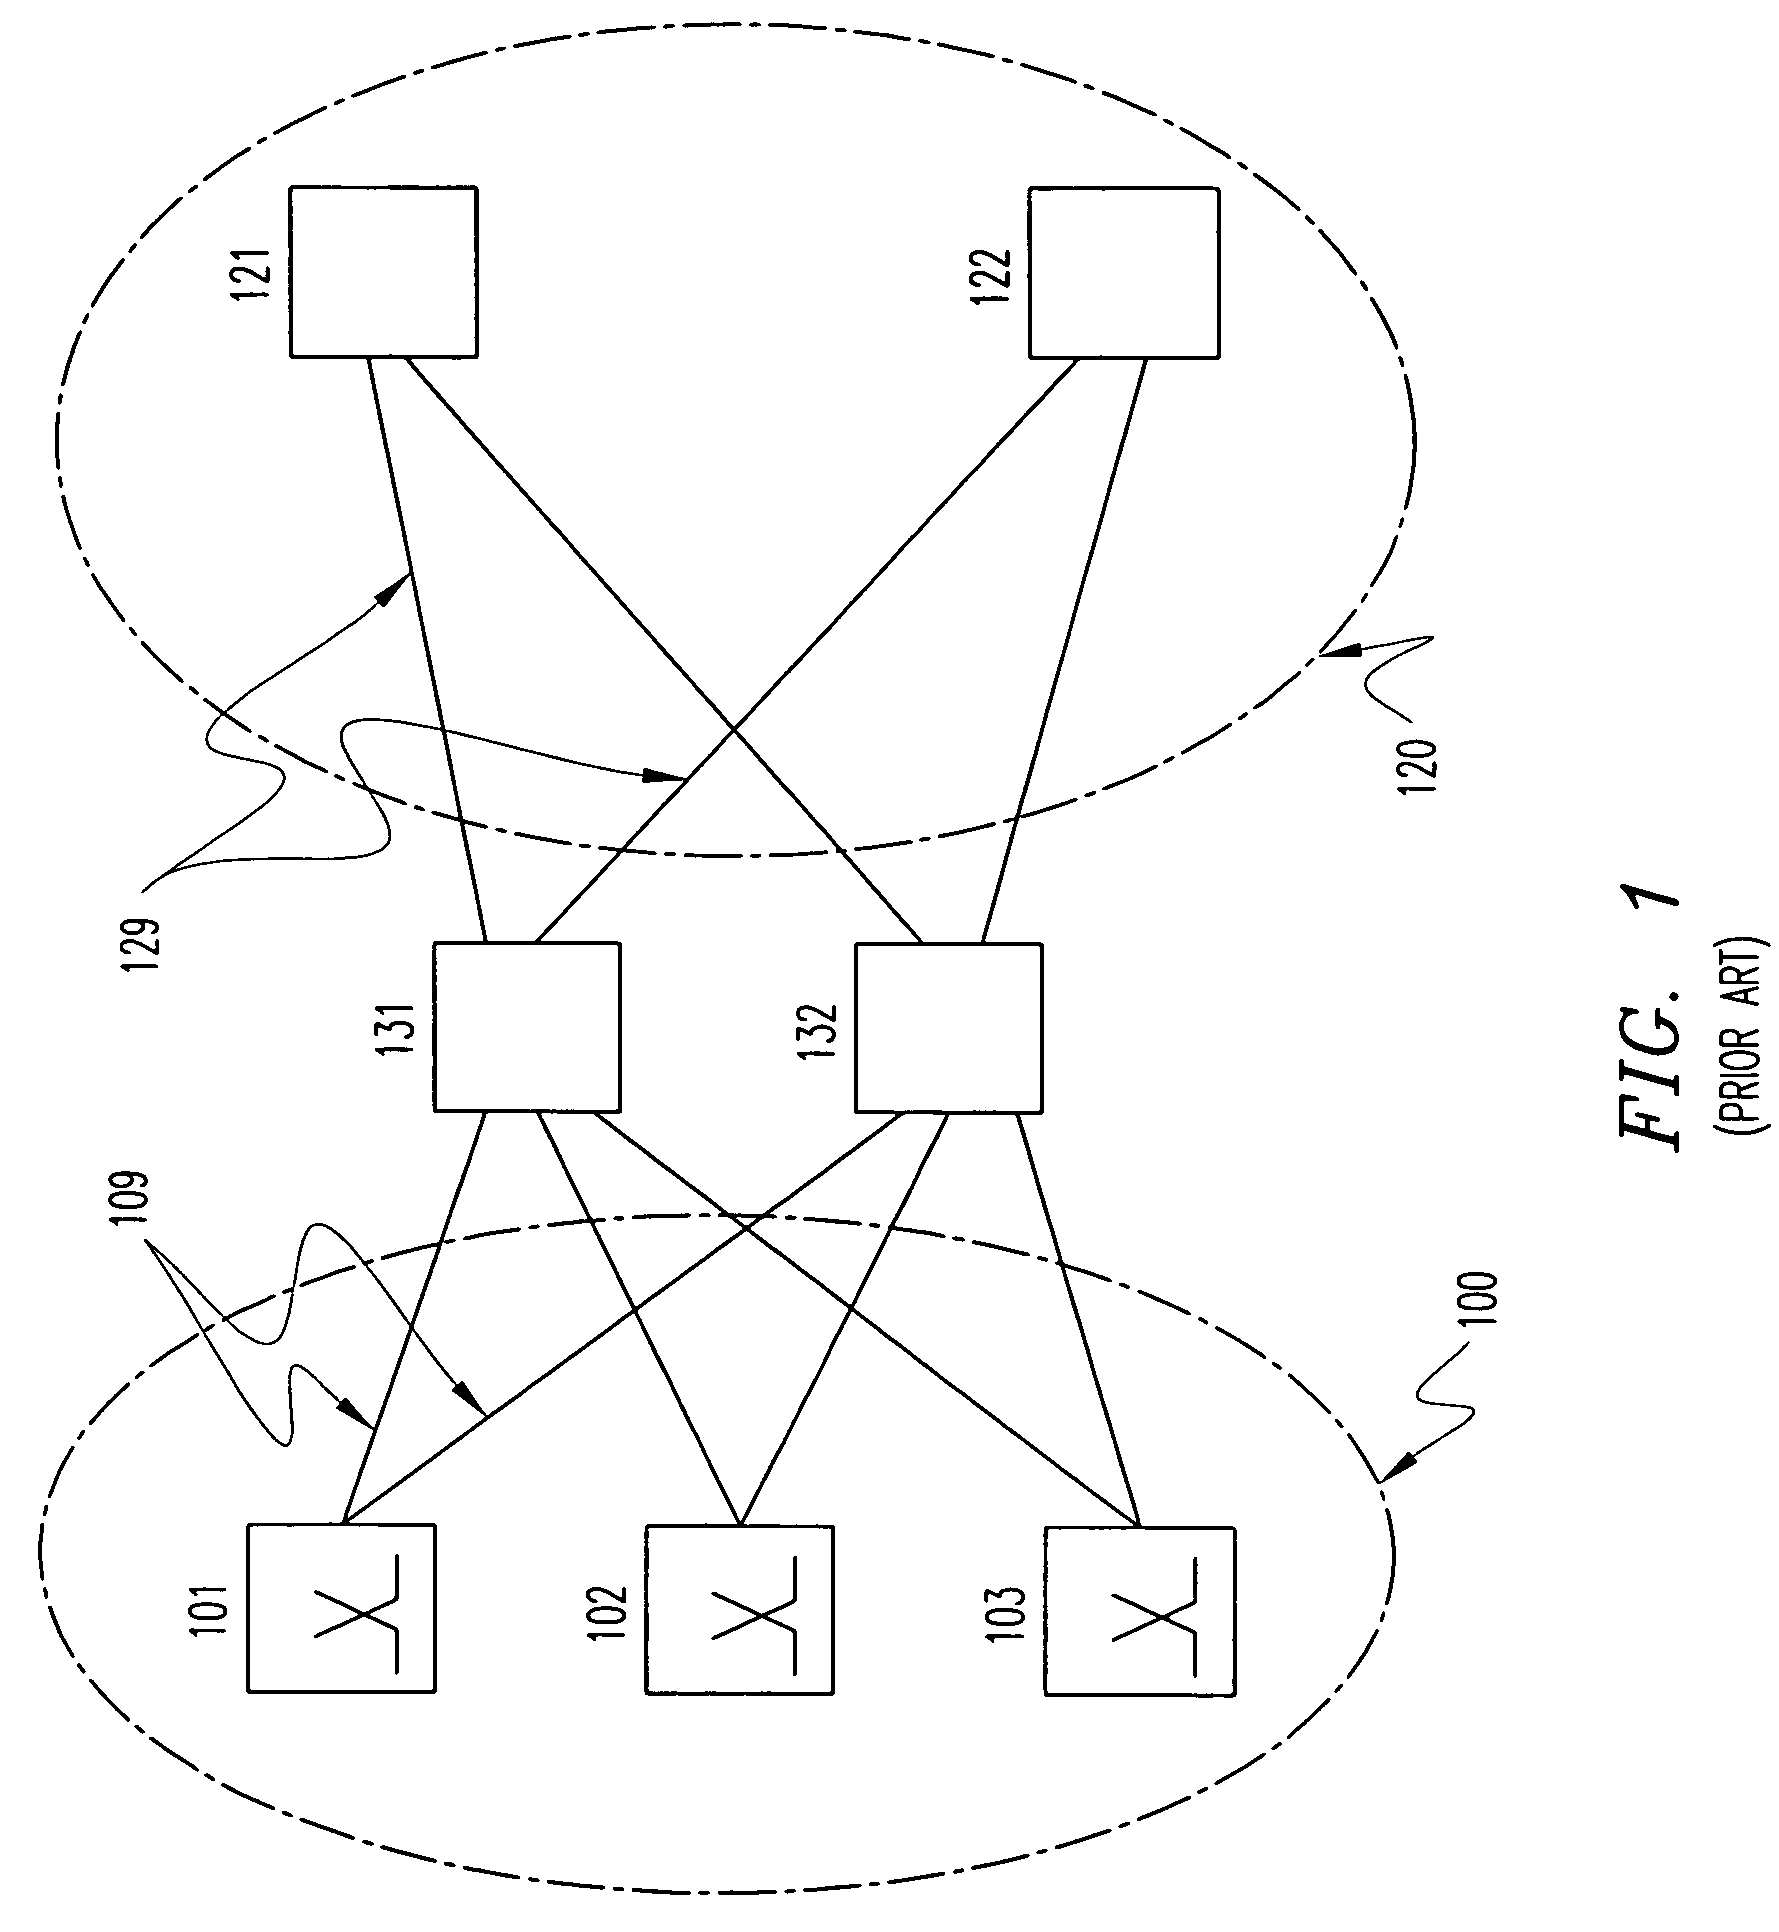 Method and system for the management of signaling gateways and signaling gateway processes in transport of SCN signaling over data networks